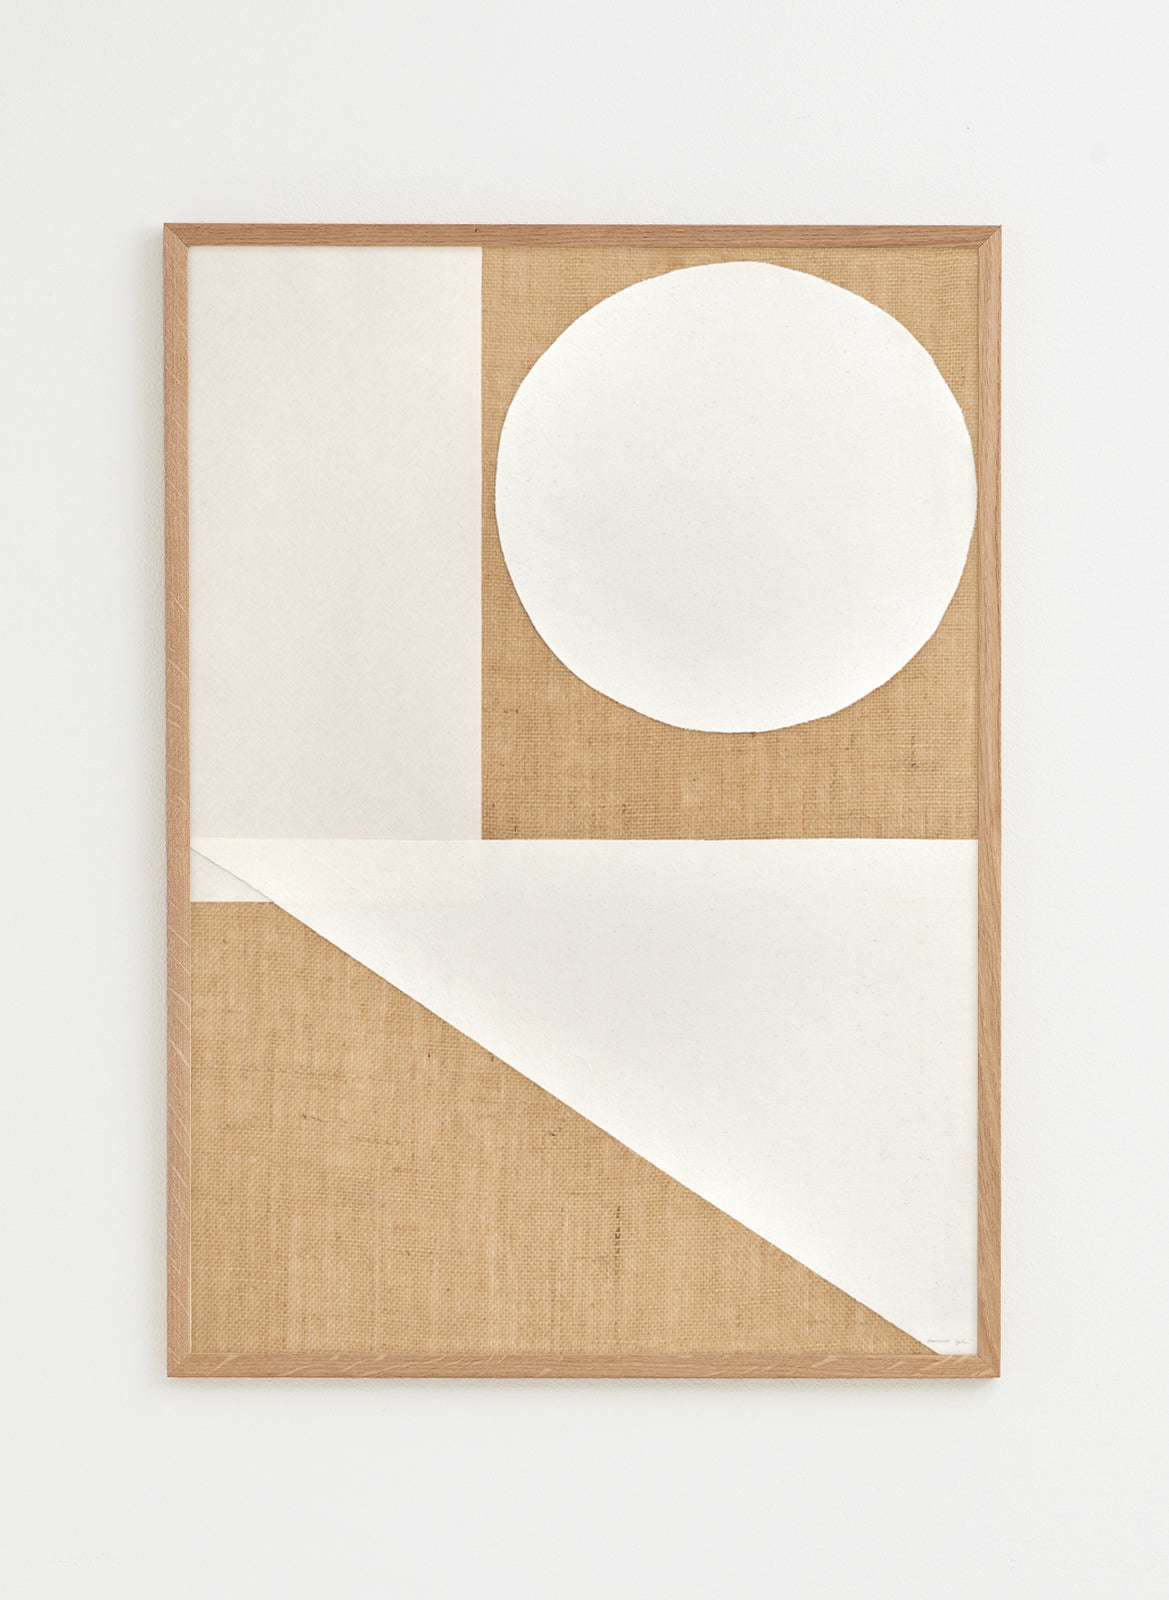 Hessian and white poster made by atelier cph